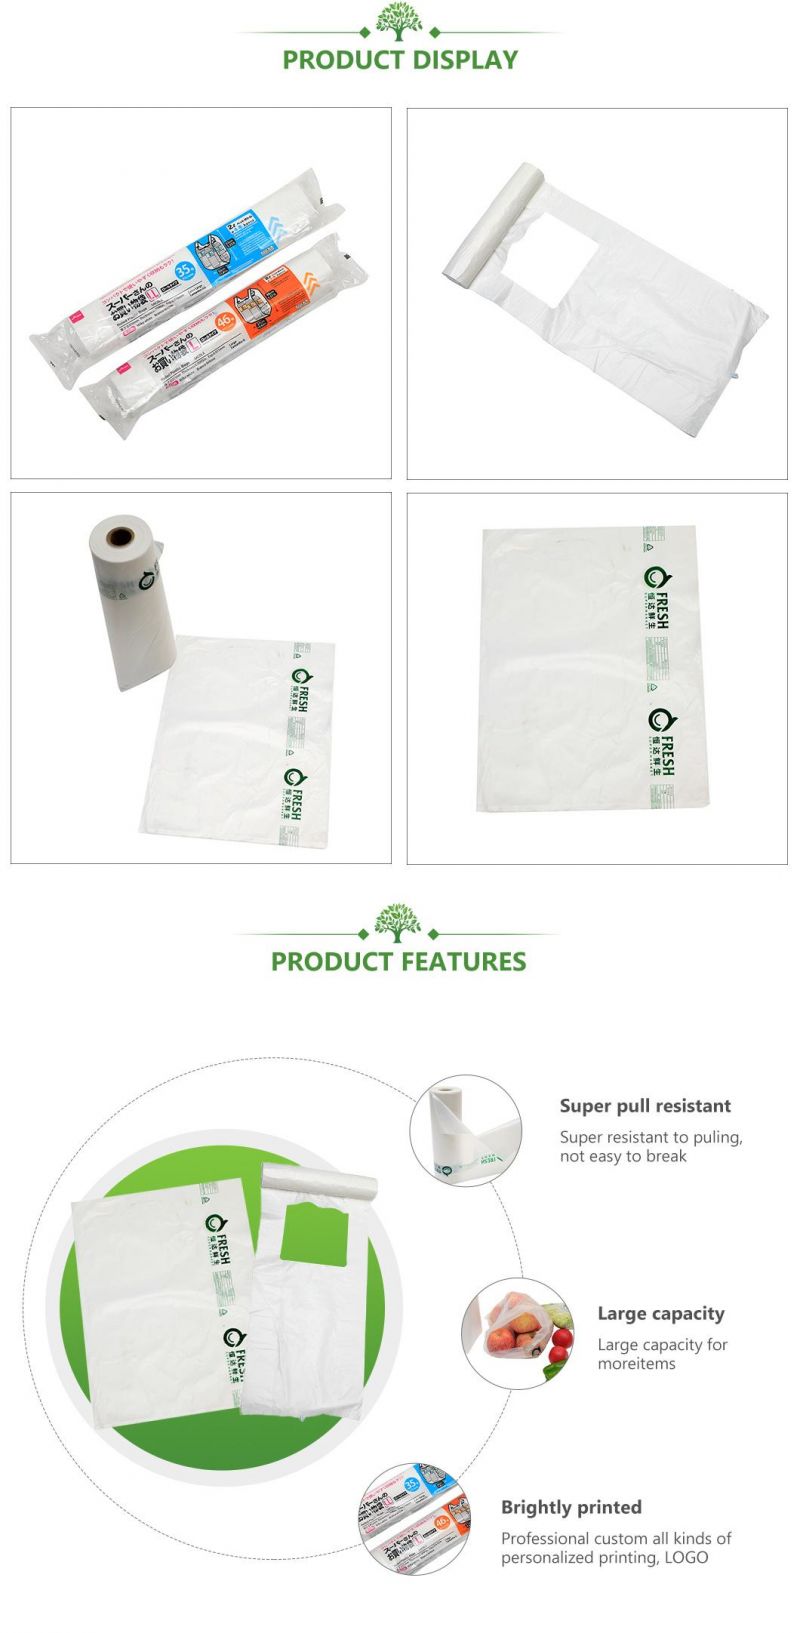 China 100% Biodegradable Bags Compostable Flat Bags on Roll, Vegetable Bags, Fruit Bags, Storage Bags, Manufacturer/Supplier/Wholesale/Factory